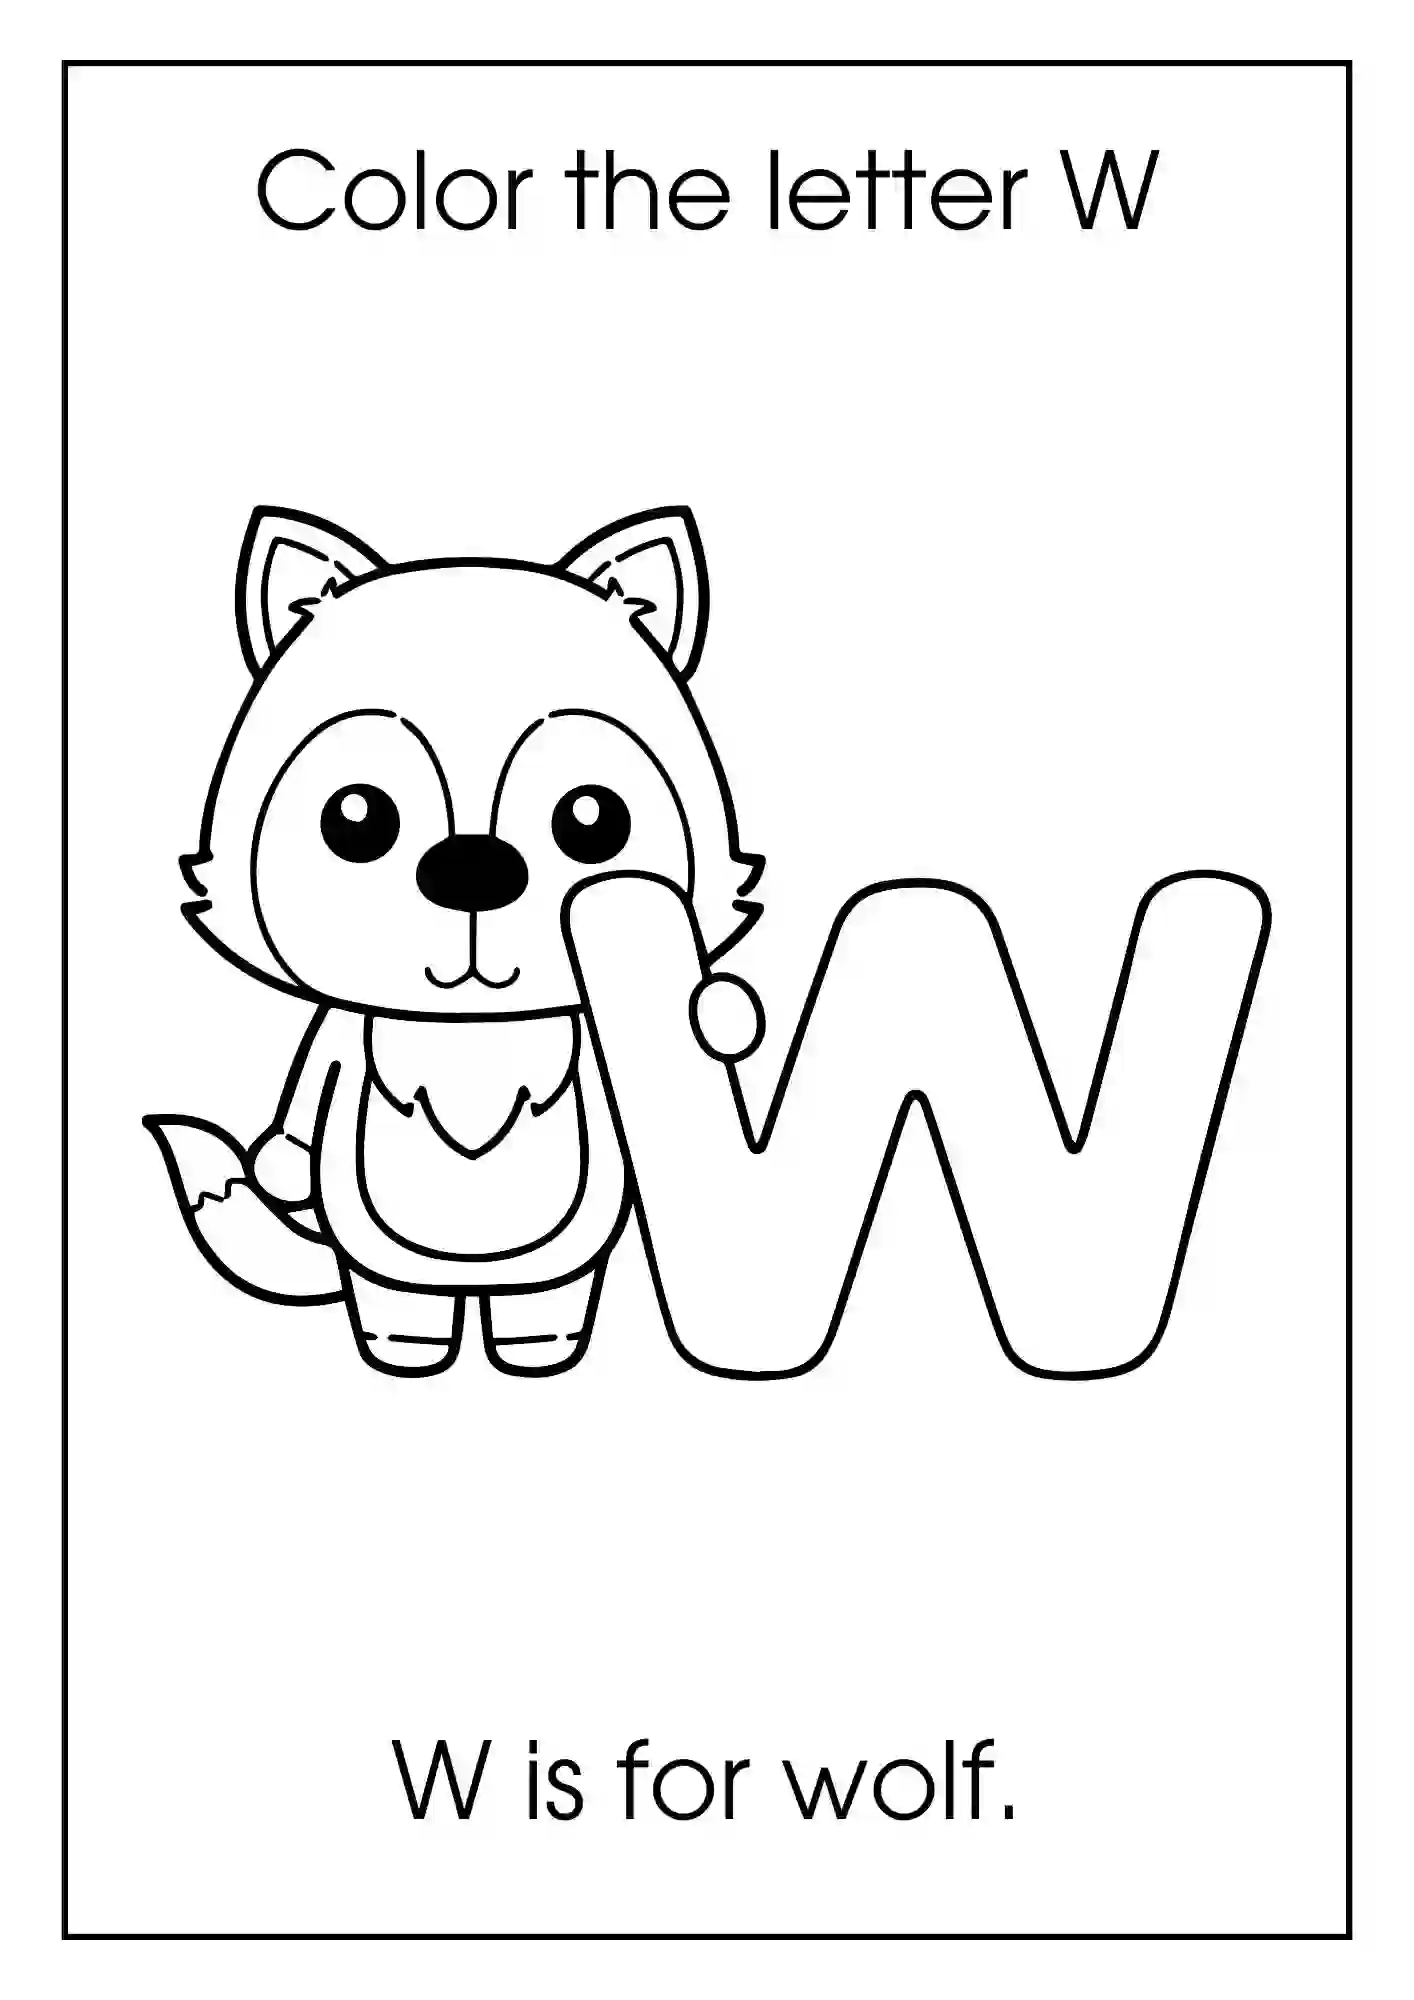 Animal Alphabet Coloring Worksheets For Kindergarten (Letter w  with wolf)